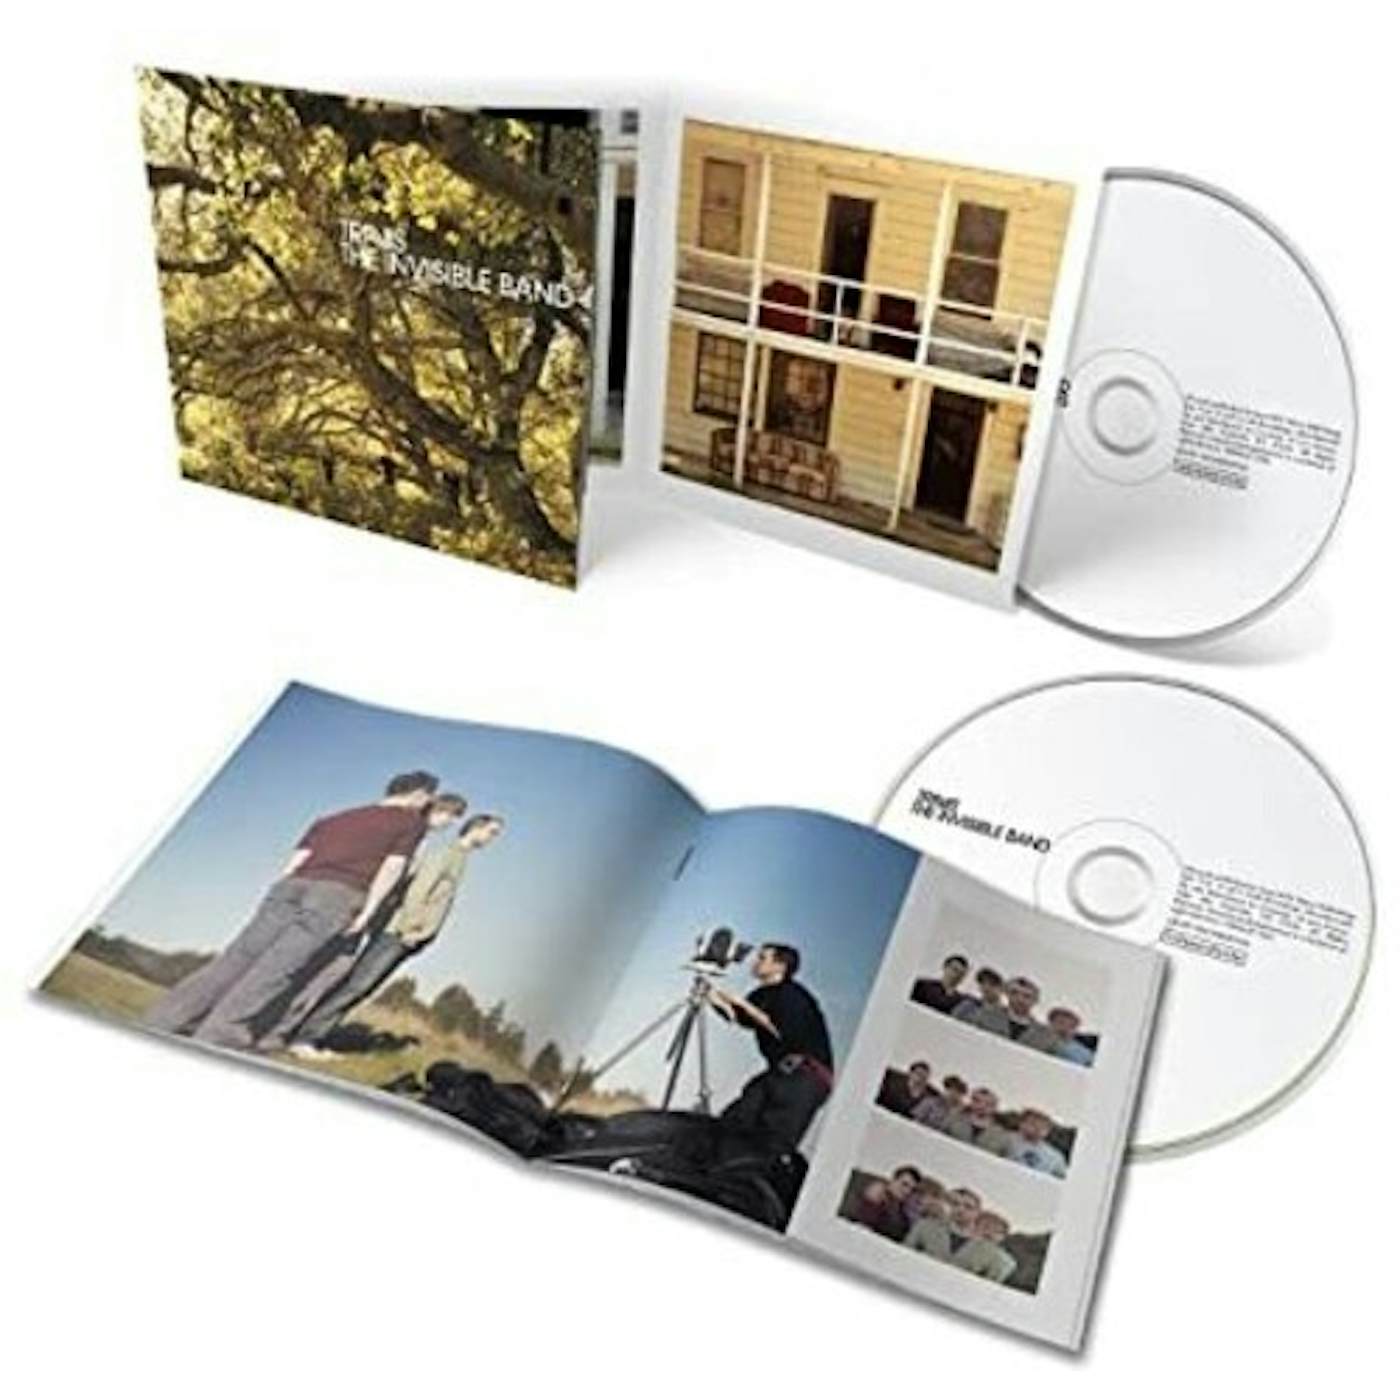 Travis INVISIBLE BAND CD